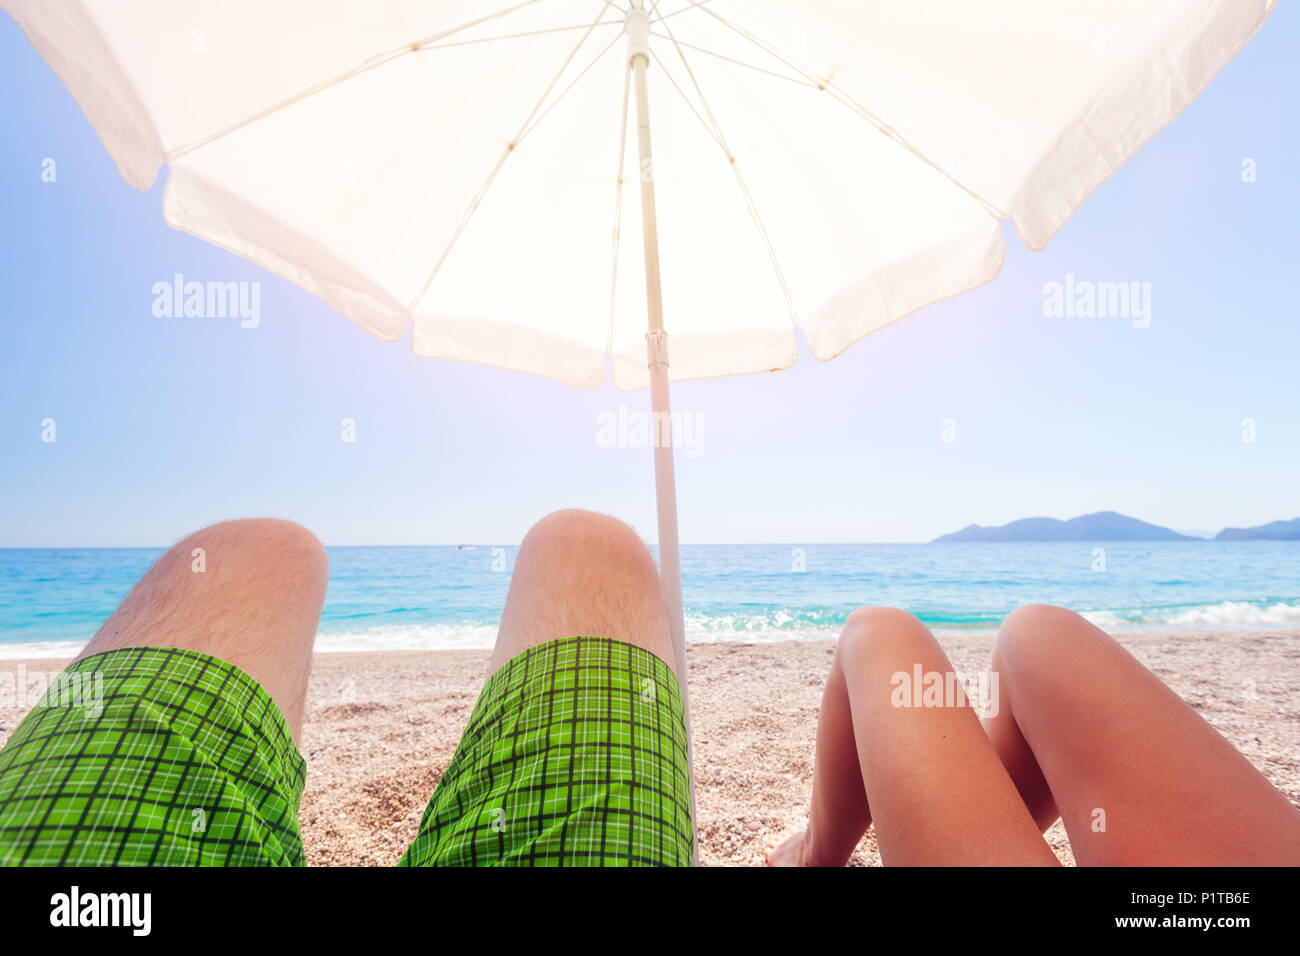 umbrella on a beach and legs of two peoples Stock Photo